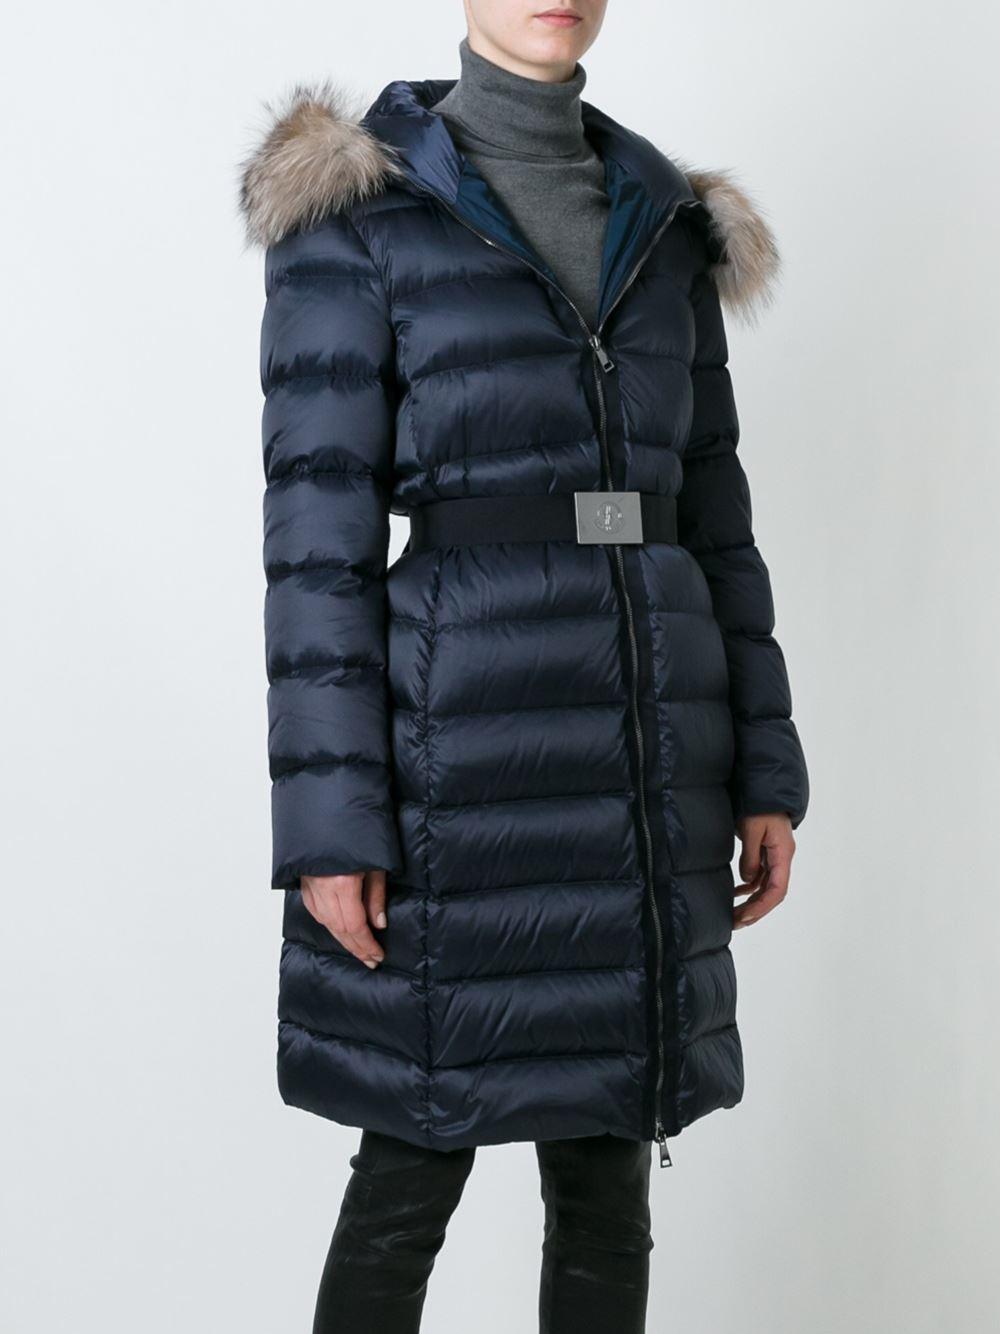 Moncler Tinuviel Black Hotsell, 53% OFF | www.logistica360.pe